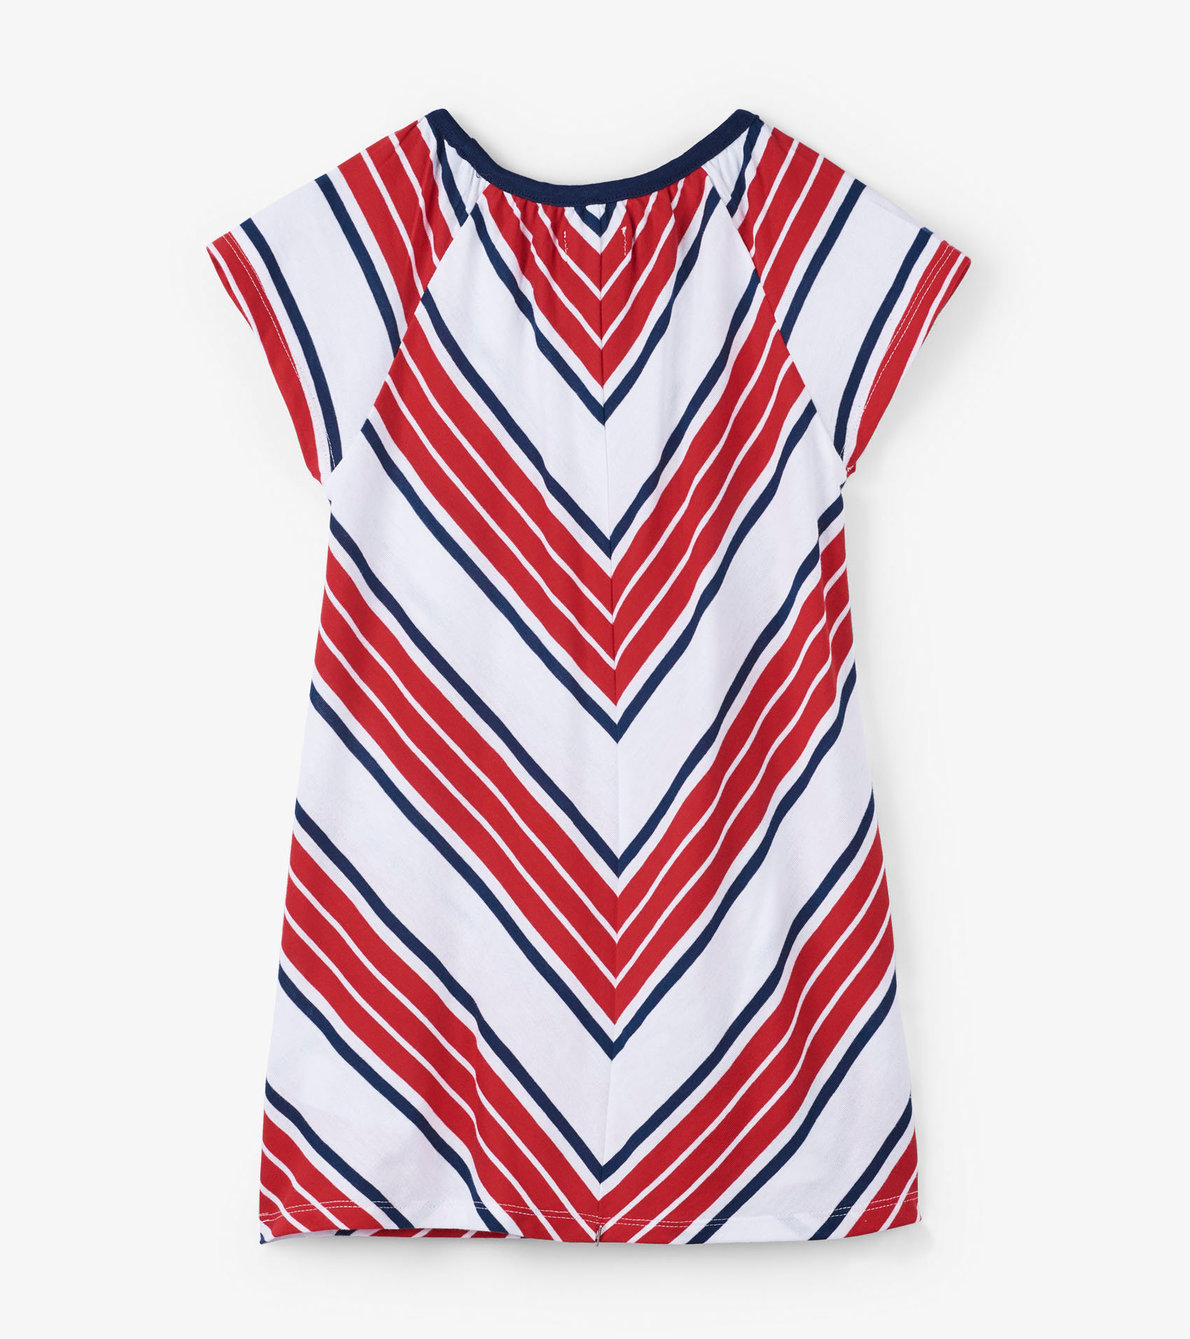 View larger image of Red and Navy Stripes Tee Shirt Dress